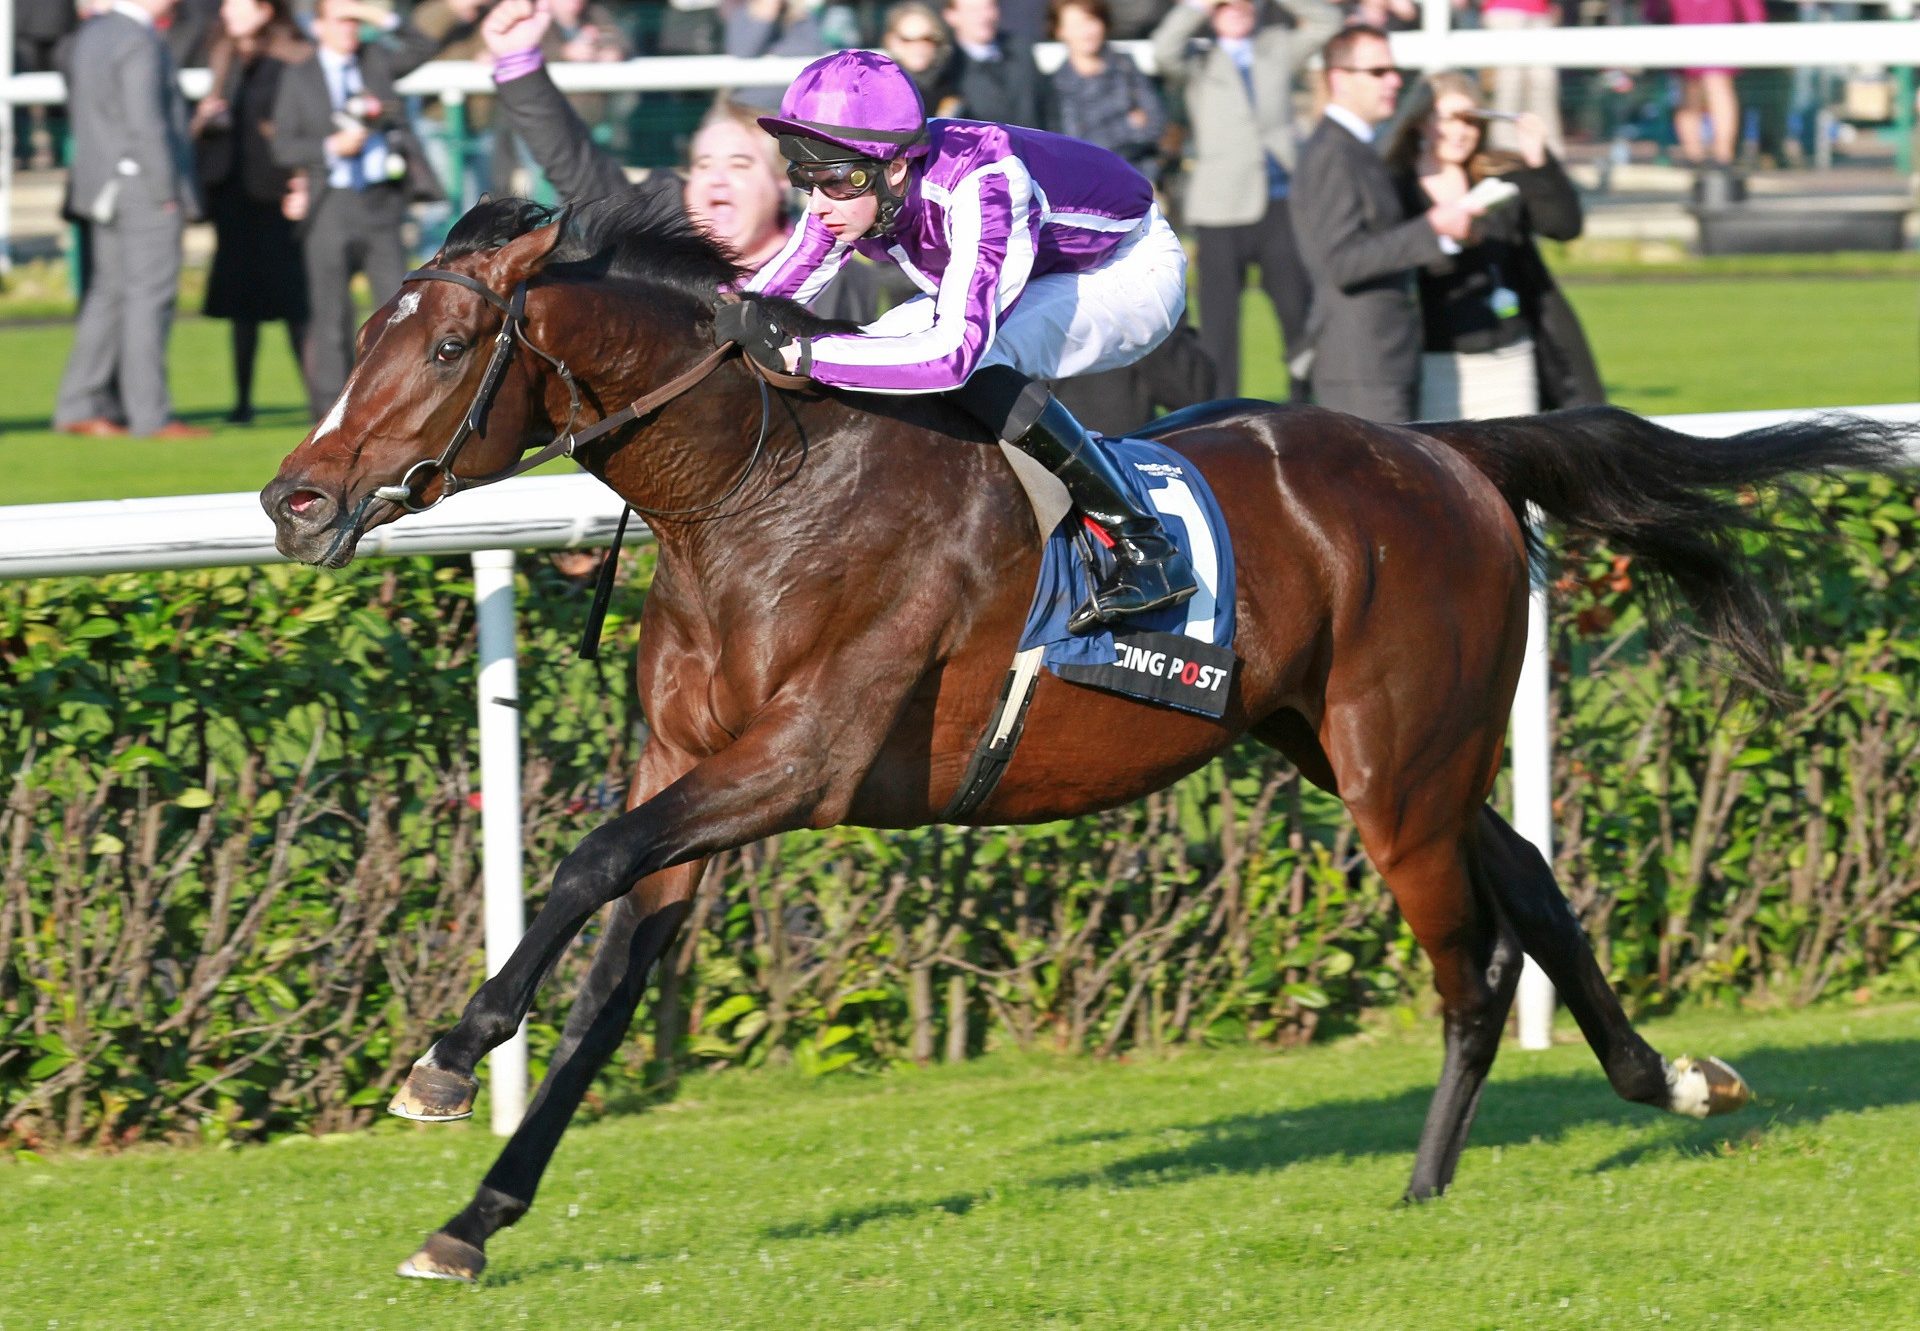 Camelot winning the G1 Racing Post Trophy